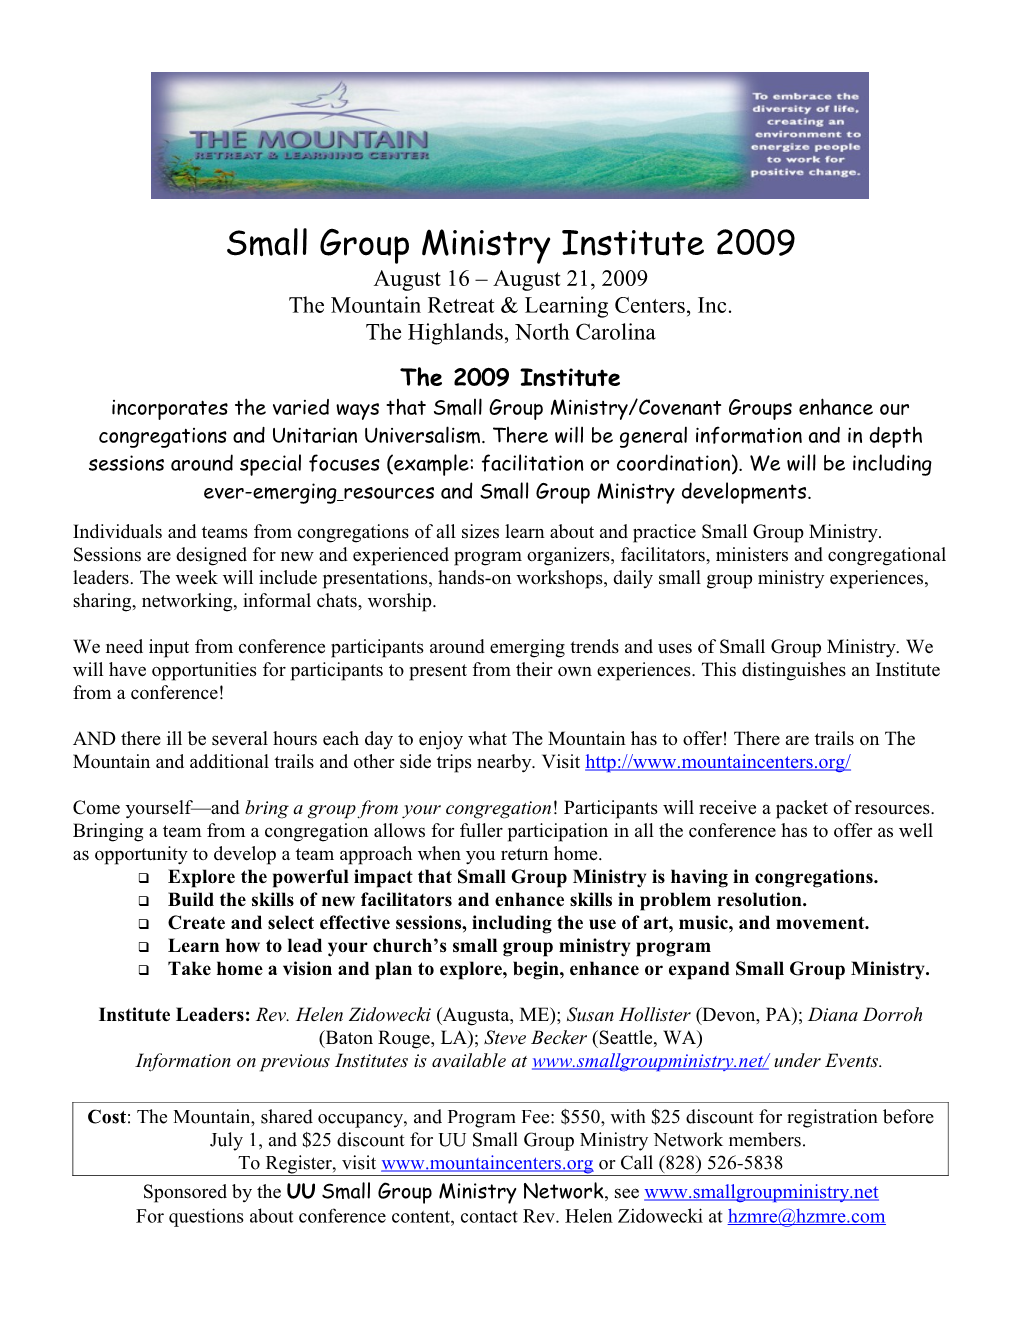 Small Group Ministry Network Institute